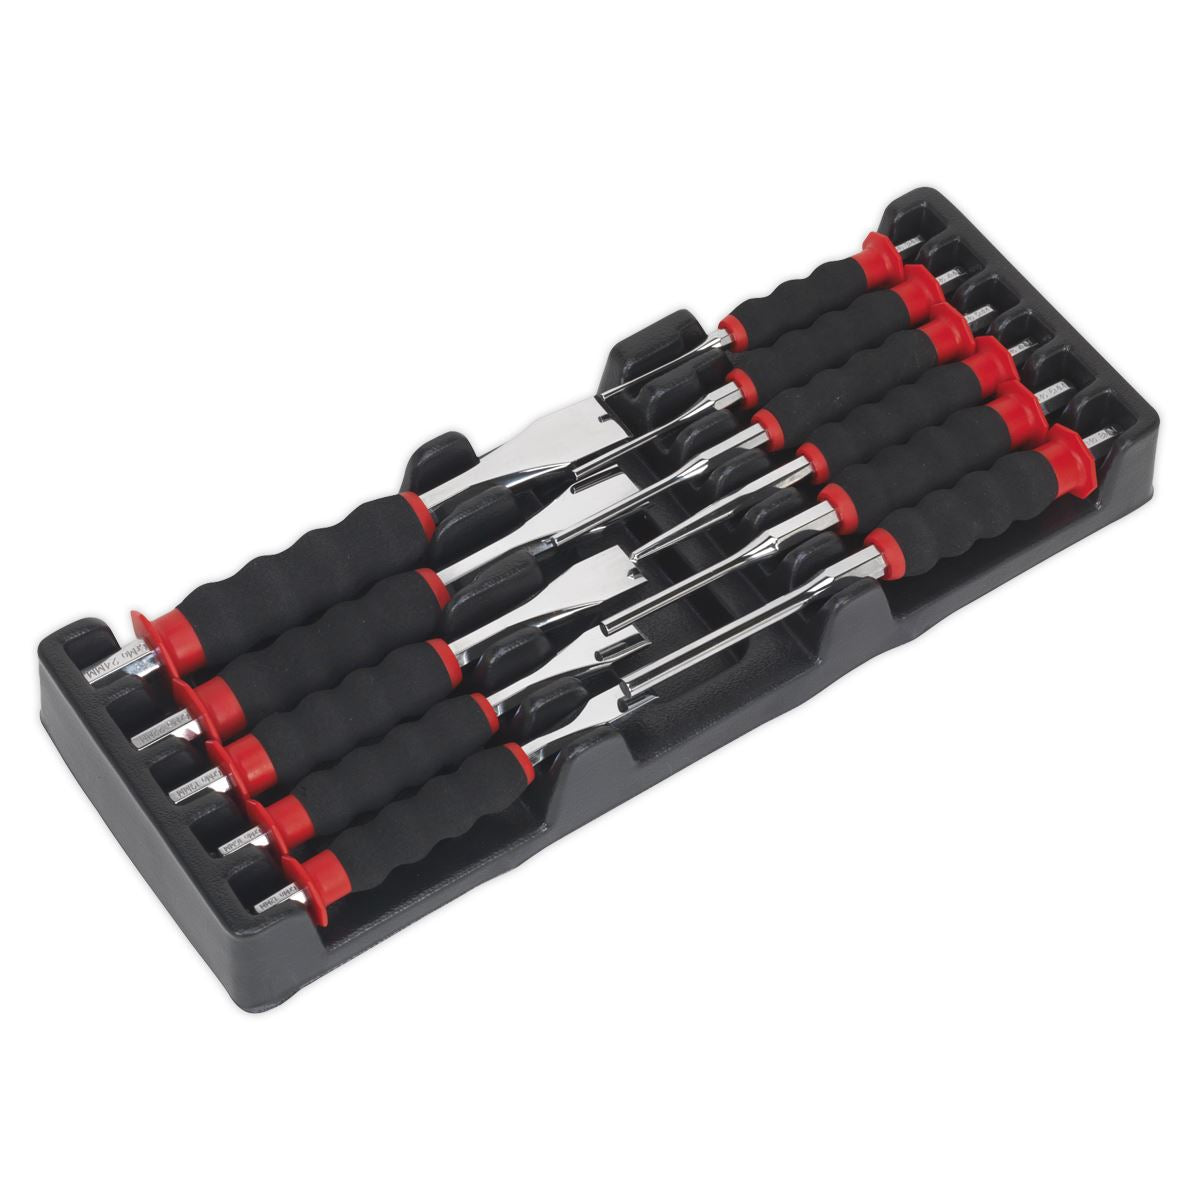 Sealey Sheathed Punch and Chisel Set 11 Piece Premier 3-8mm Punches 12-24mm Chisels